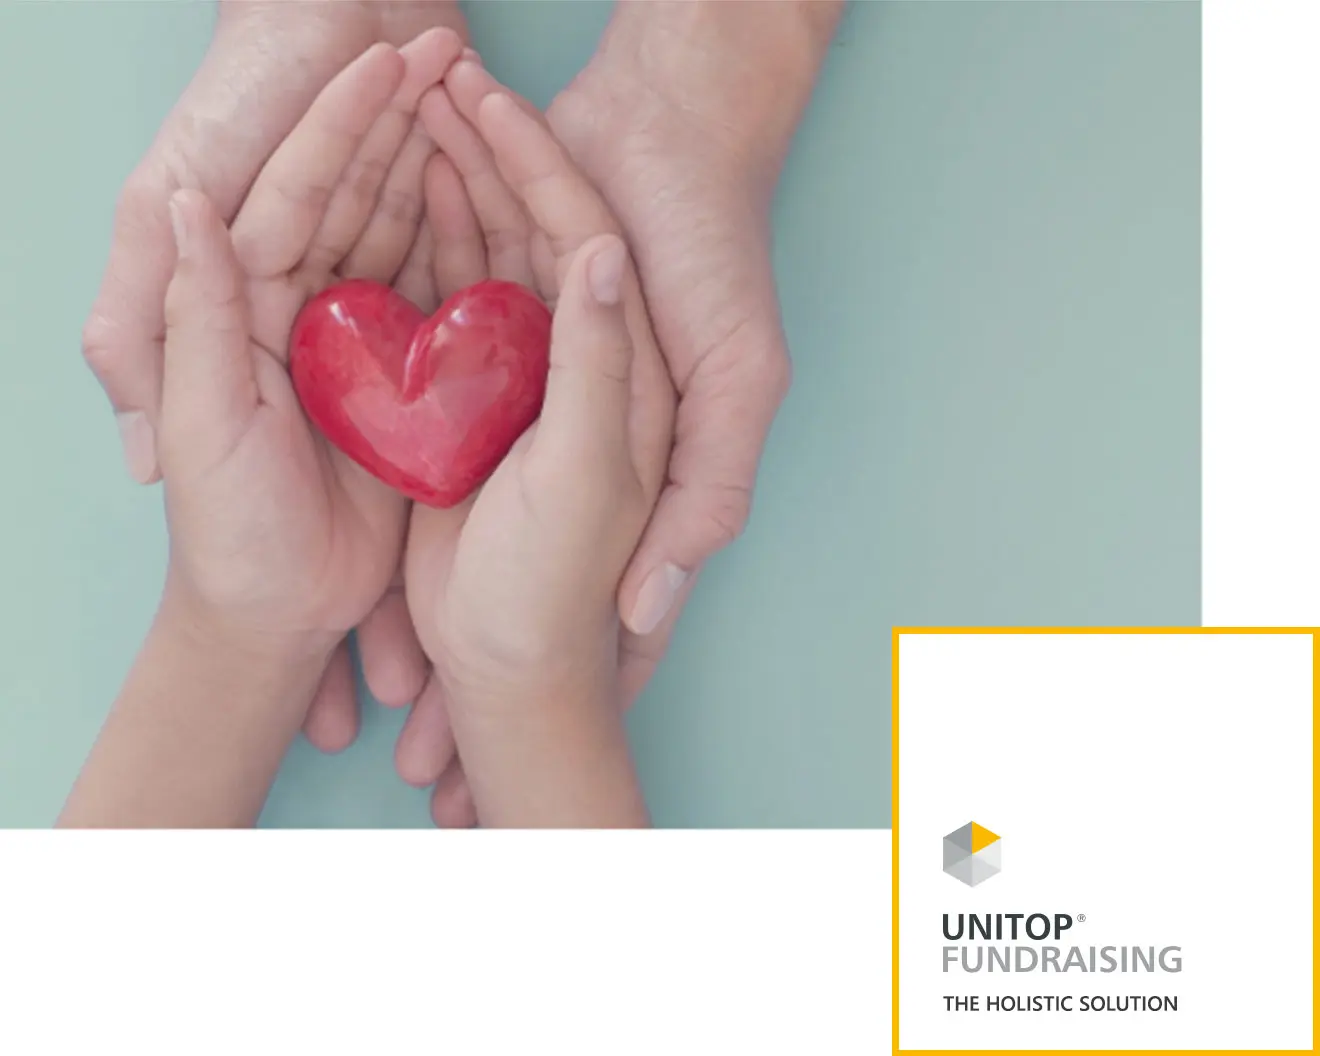 Hands holding a red heart with the logo unitop fundraising at the bottom right 